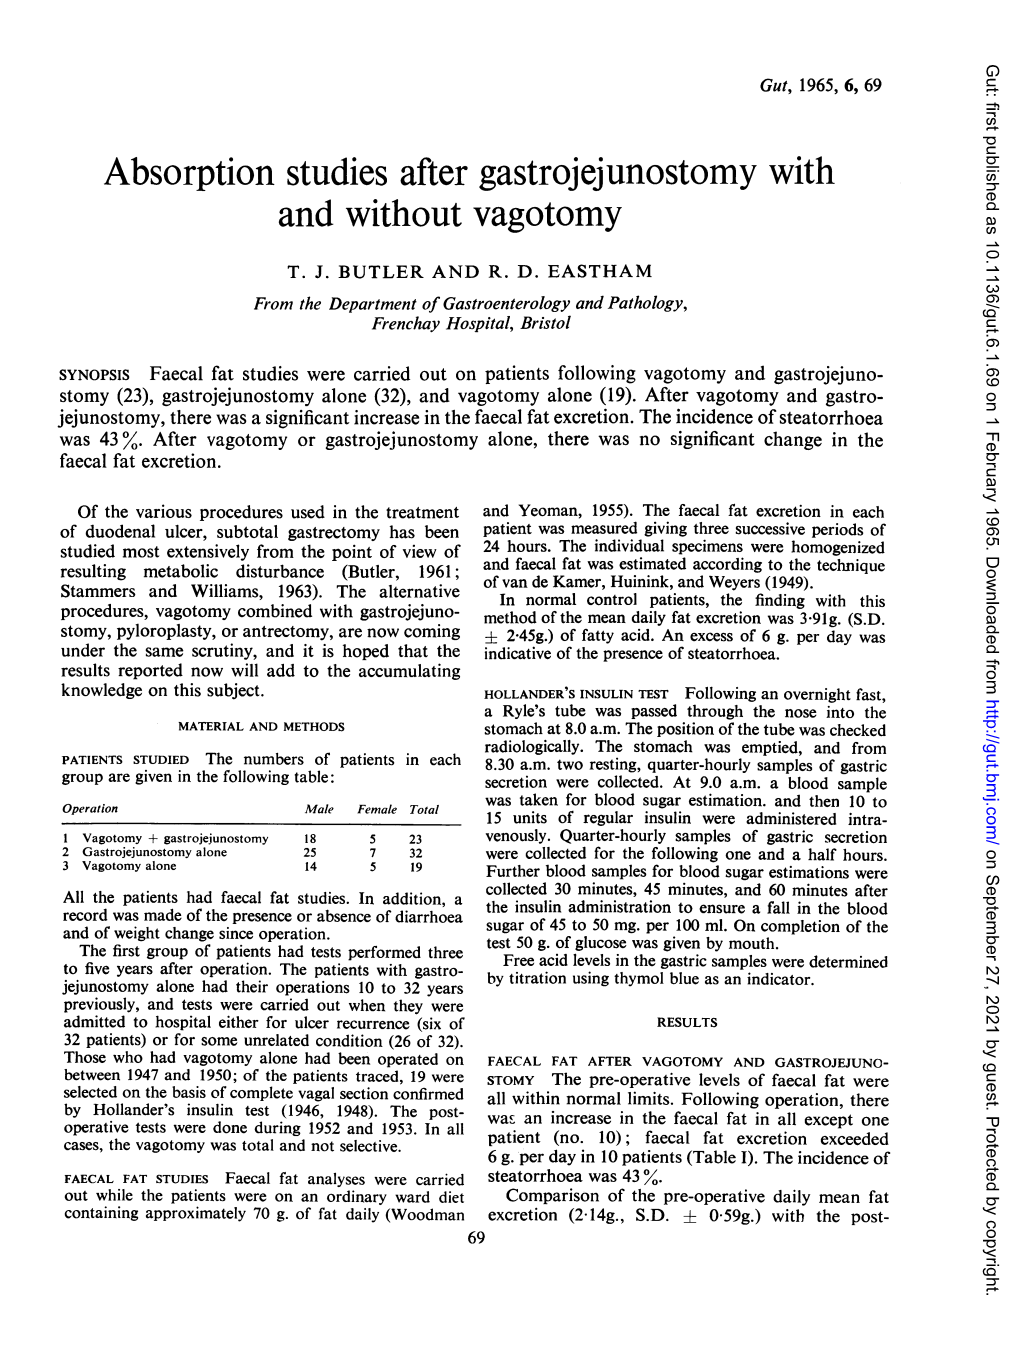 Absorption Studies After Gastrojejunostomy with and Without Vagotomy